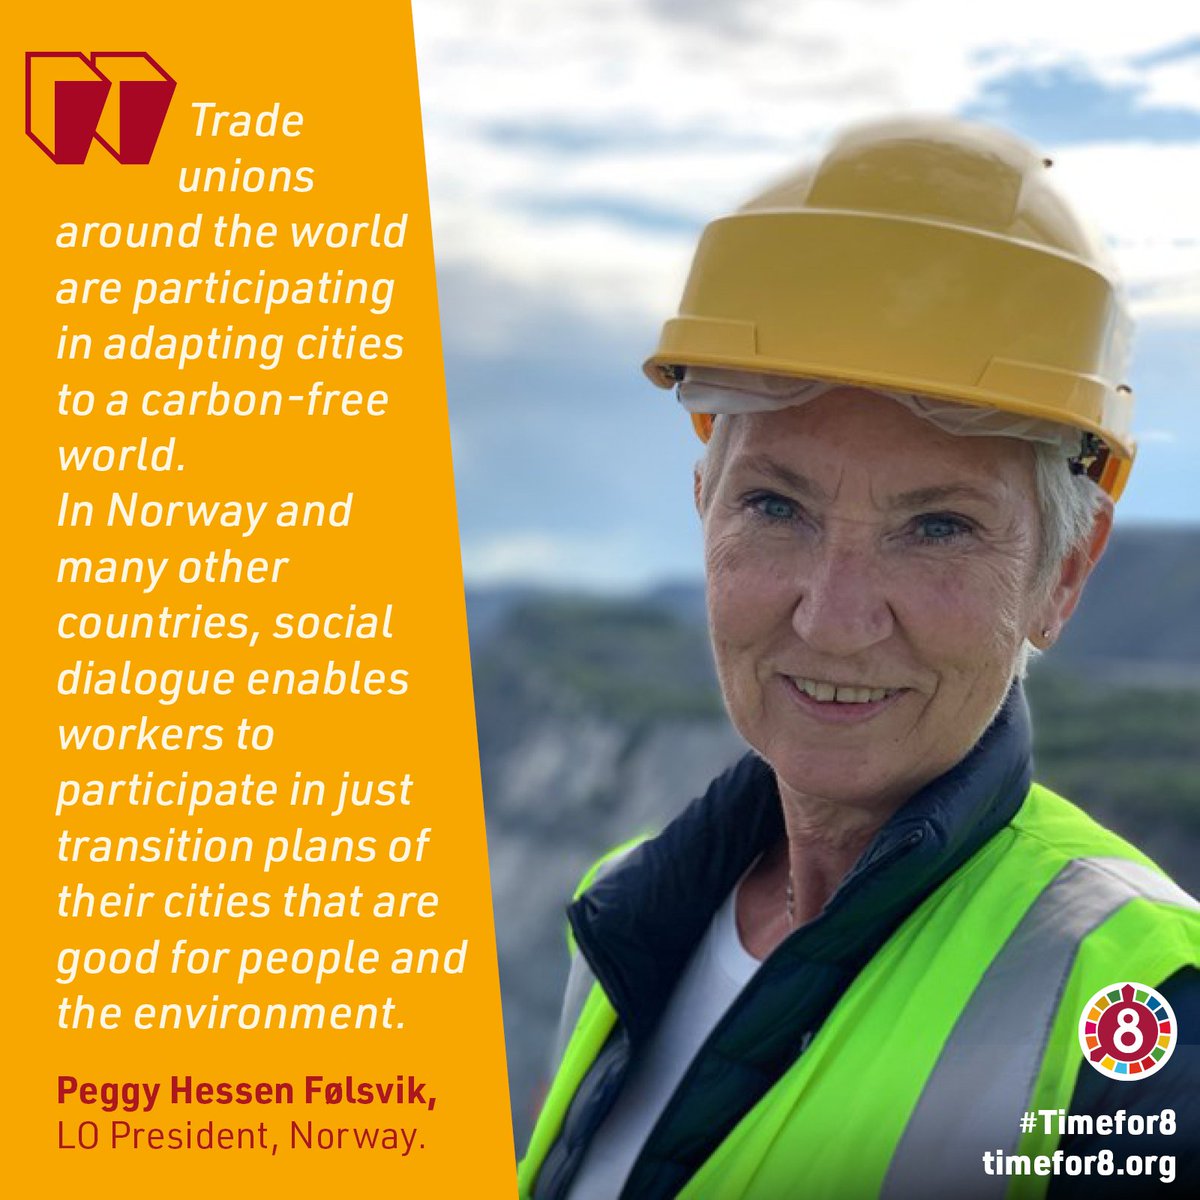 Workers are essential for sustainable cities✨ Govs must involve workers in devising cities' sustainable development plans, and invest in decent, green jobs with #justtransitions
➡️ ituc-csi.org/hlpf-2023-sust… 
@lonorge  #SDG11 #SDG8 #timefor8 #HLPF2023